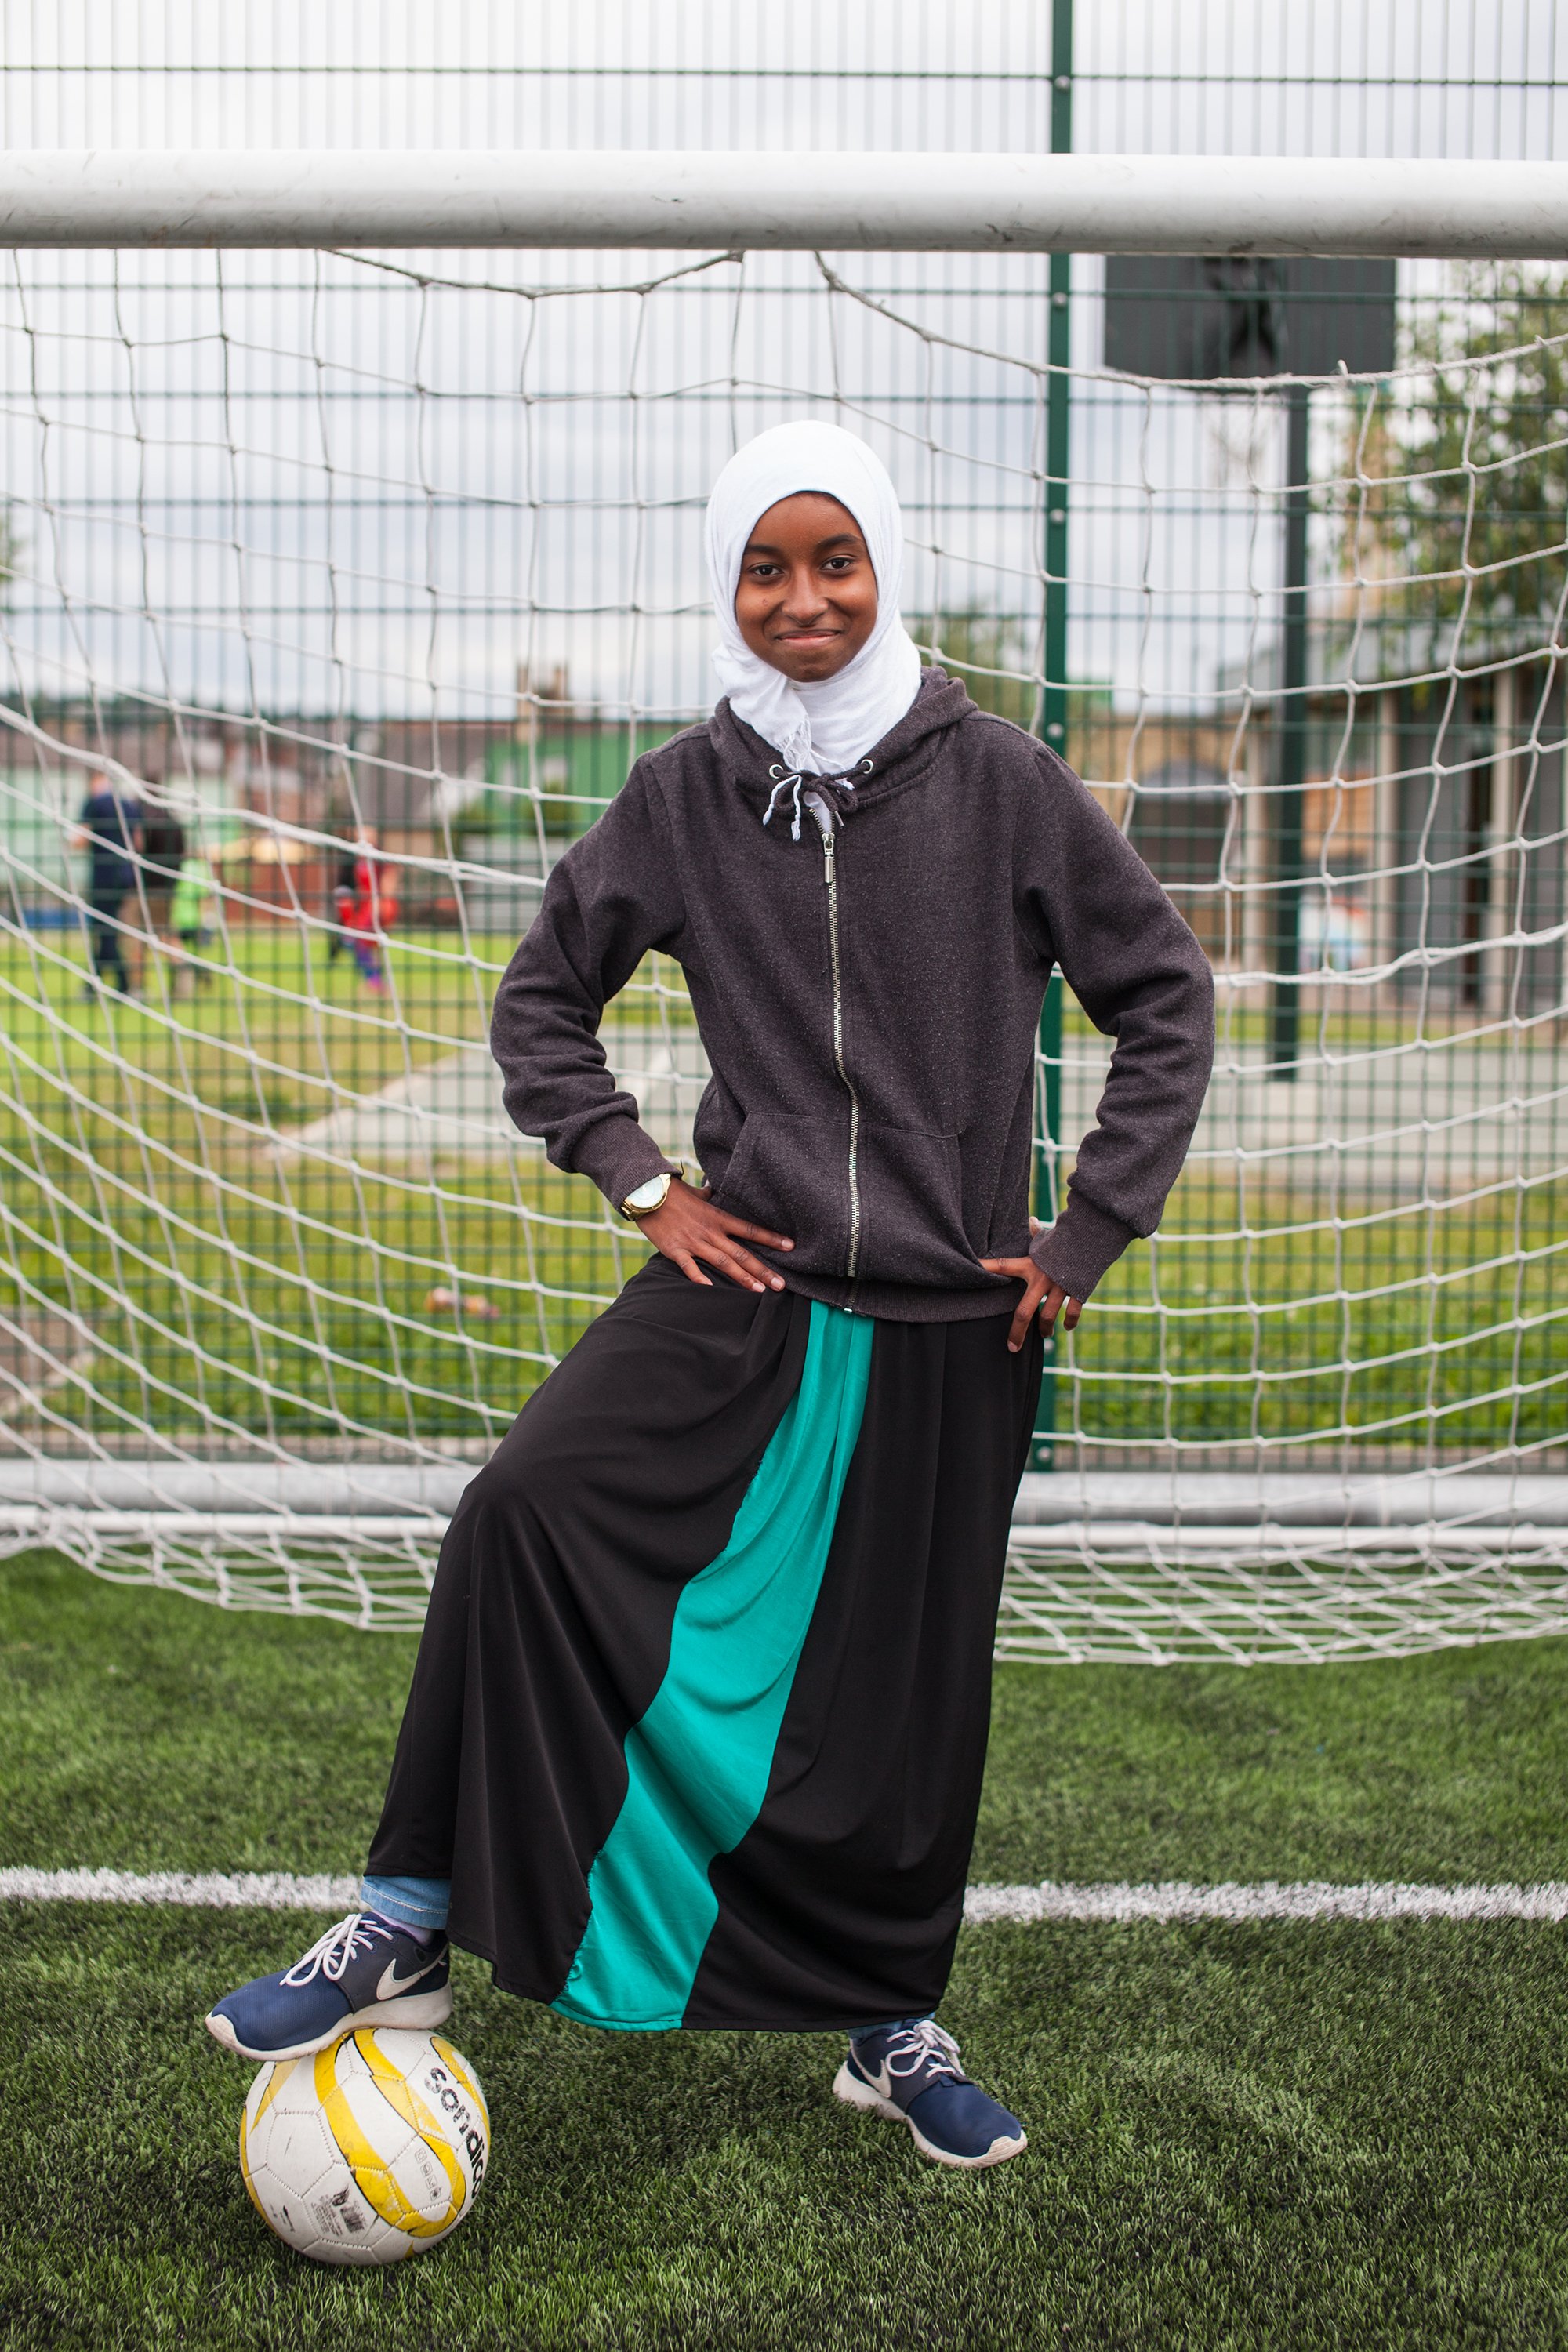  Hafsah at the FURD (Football Unites, Racism Divides) pitches in Sheffield.  